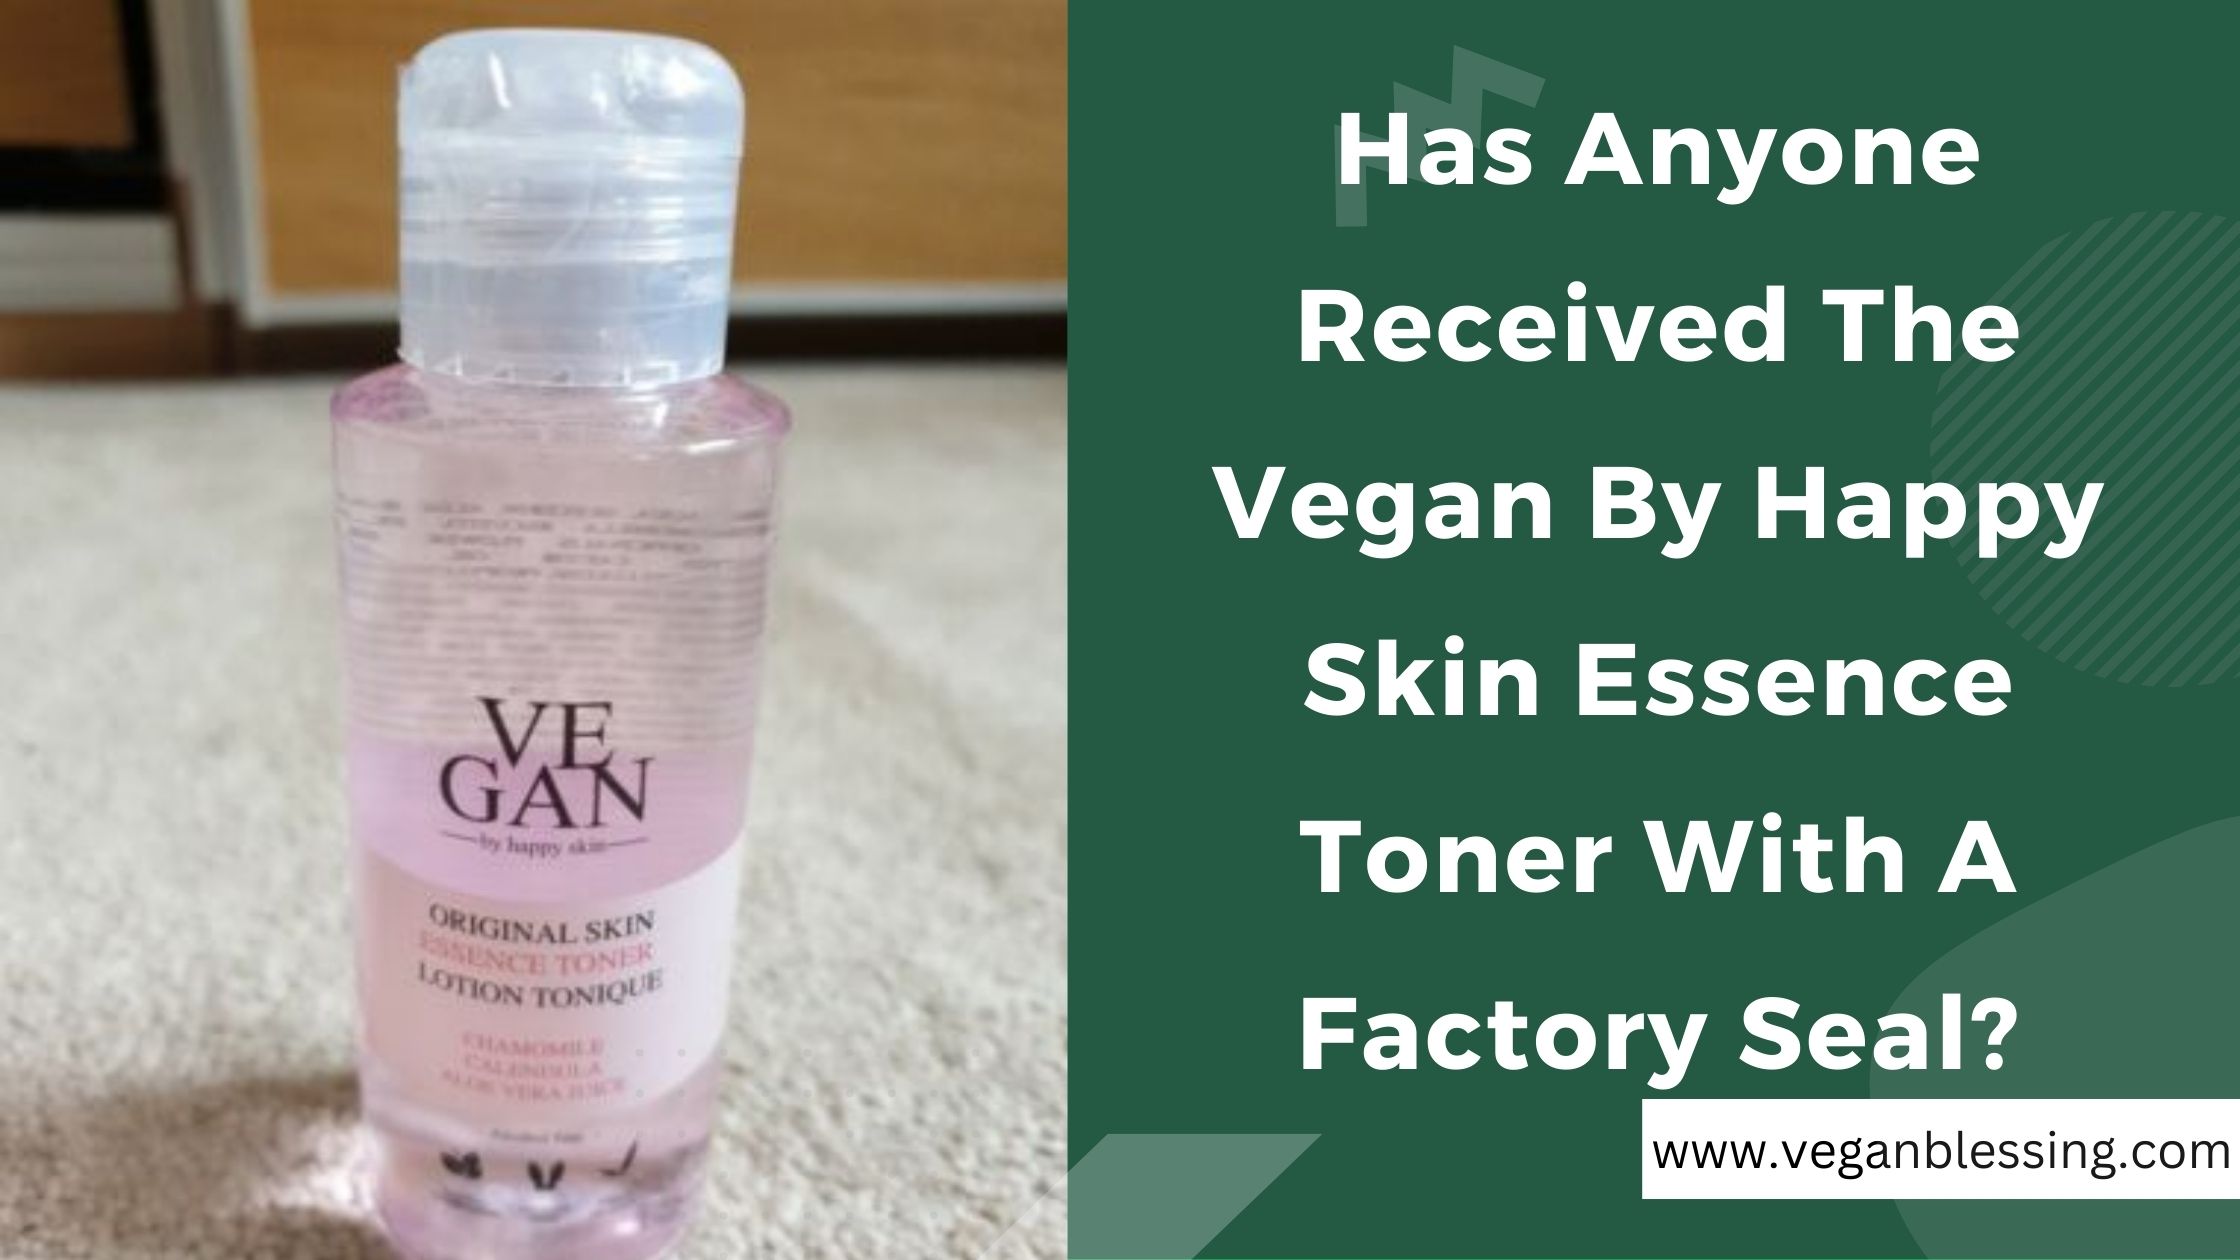 Has Anyone Received The Vegan By Happy Skin Essence Toner With A Factory Seal? Has Anyone Received The Vegan By Happy Skin Essence Toner With A Factory Seal